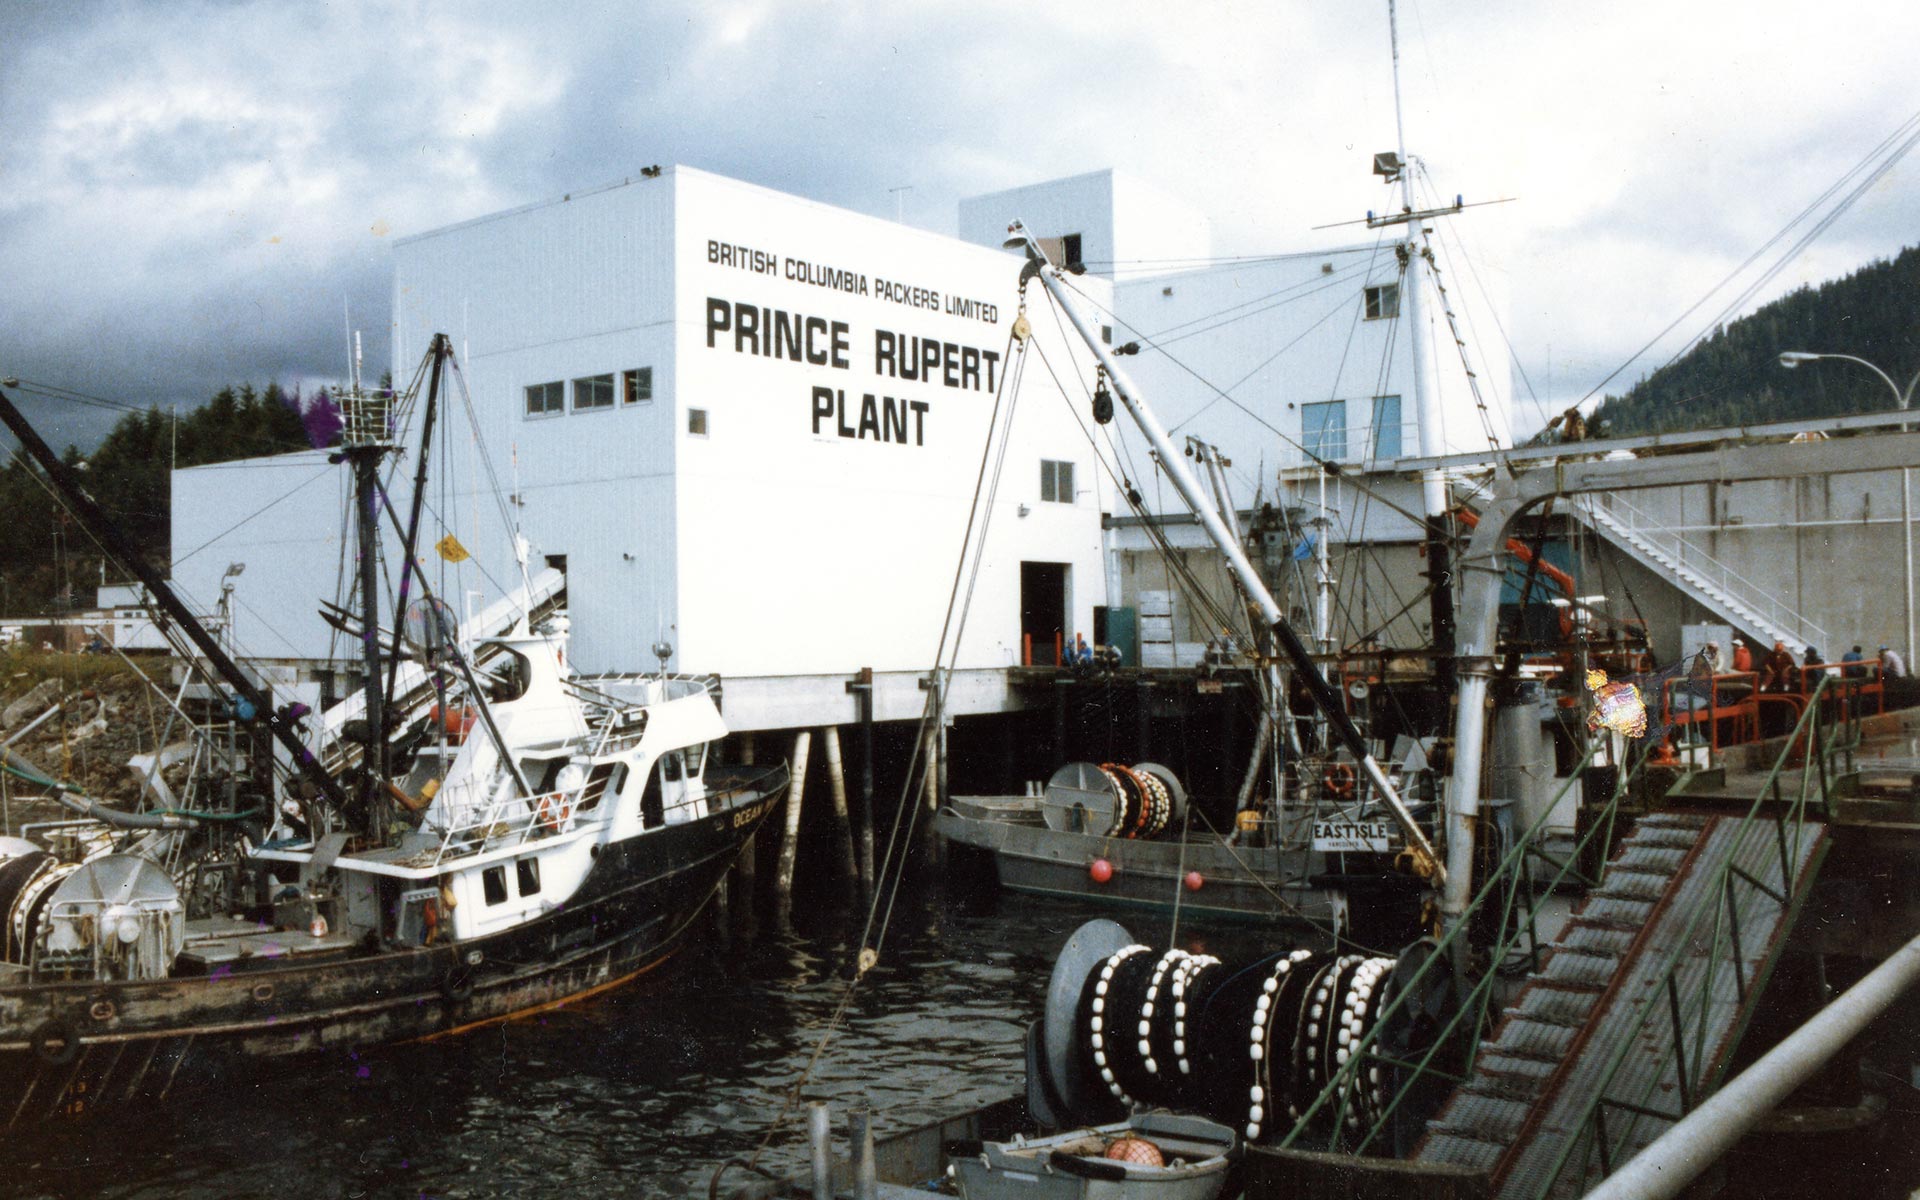 The Oceanside Cannery with docks and fishing boats in the foreground. The building is painted with the words "British Columbia Packers Limited Prince Rupert Plant."